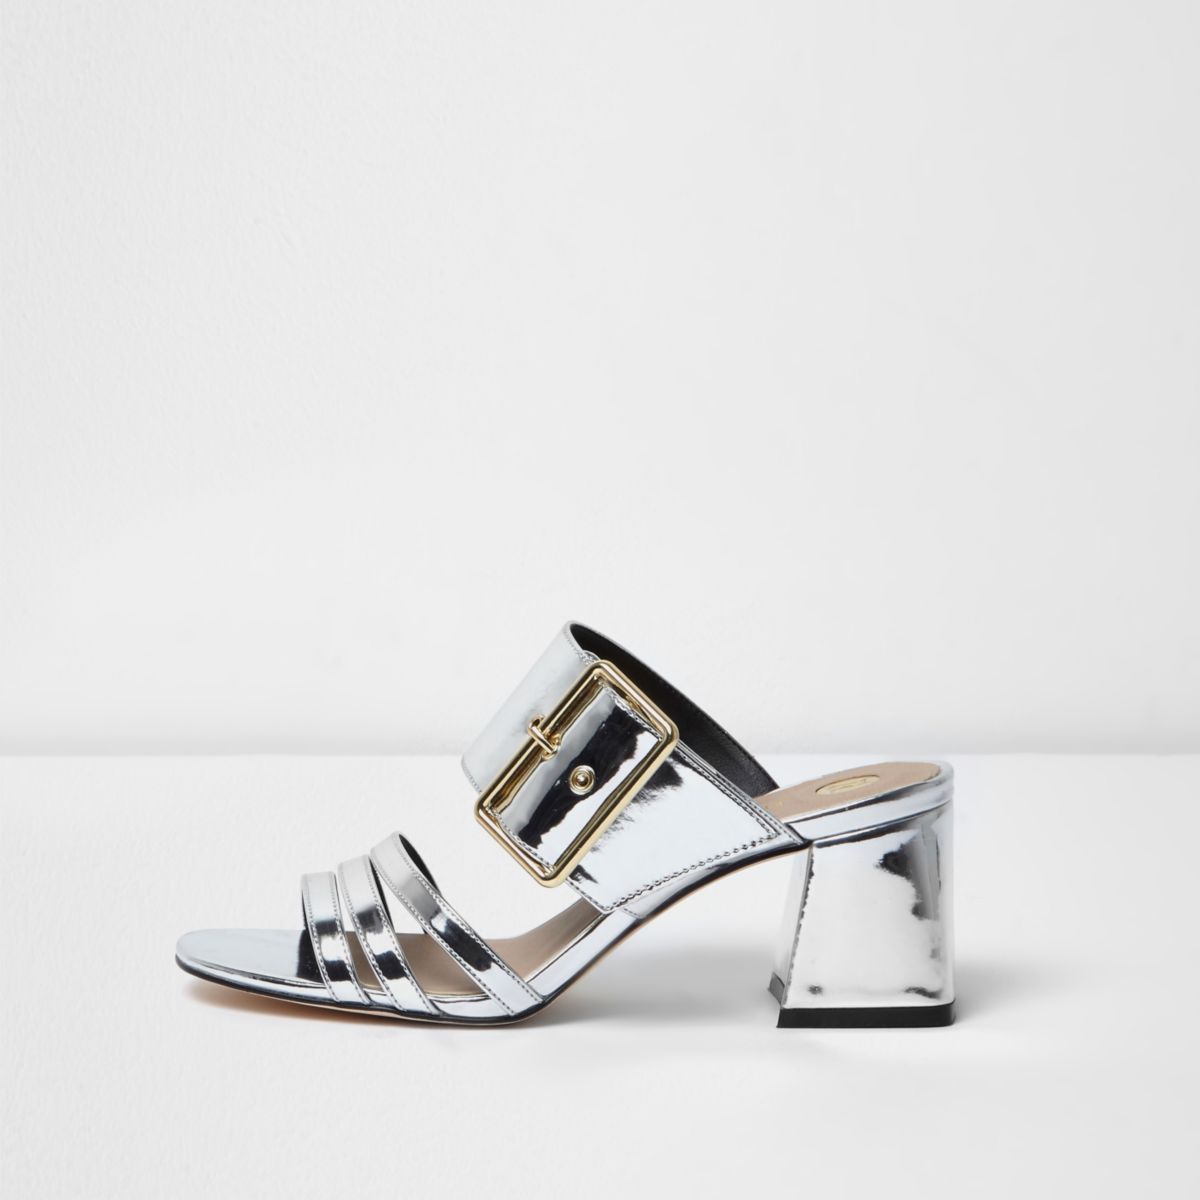 Silver metallic strappy mules - Shoes & Boots - Sale - women